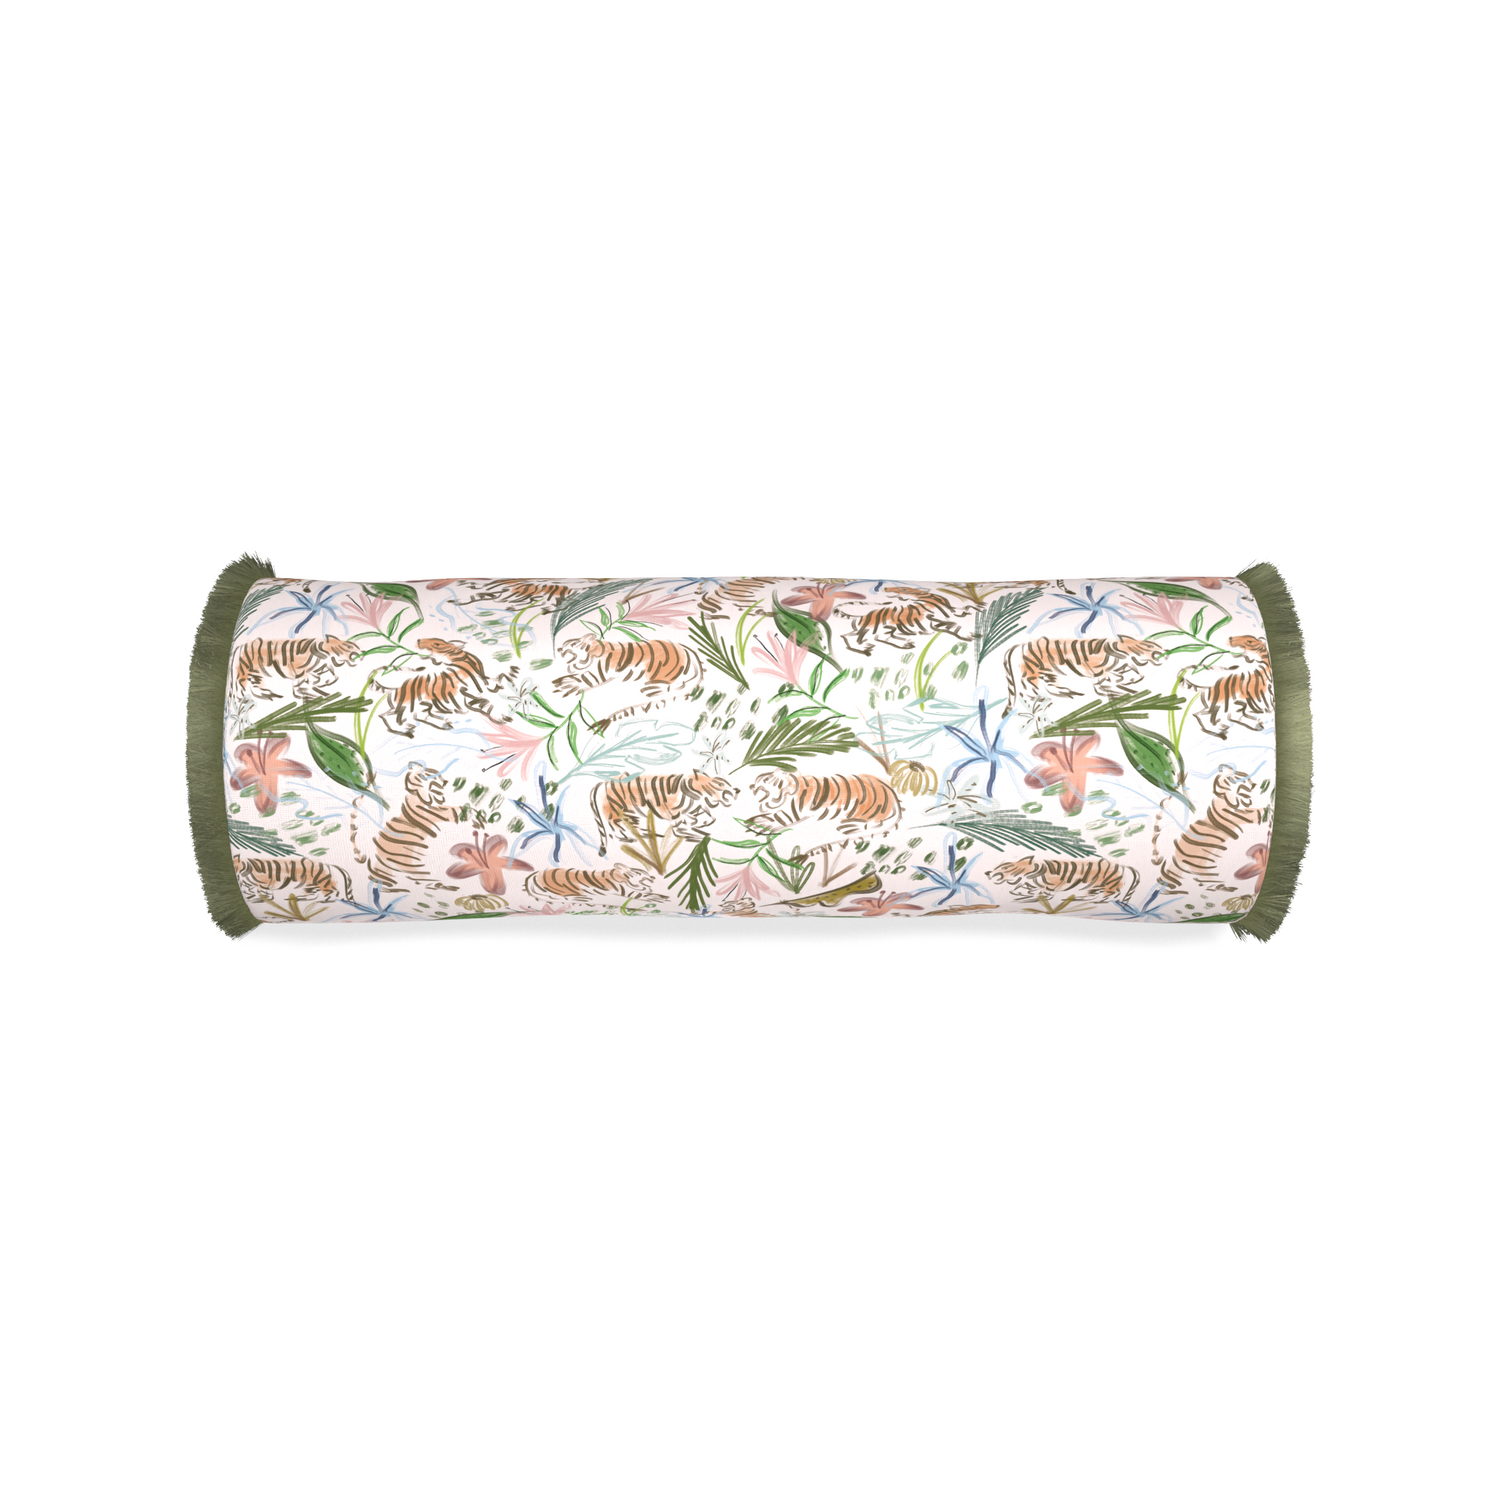 Bolster frida pink custom pink chinoiserie tigerpillow with sage fringe on white background